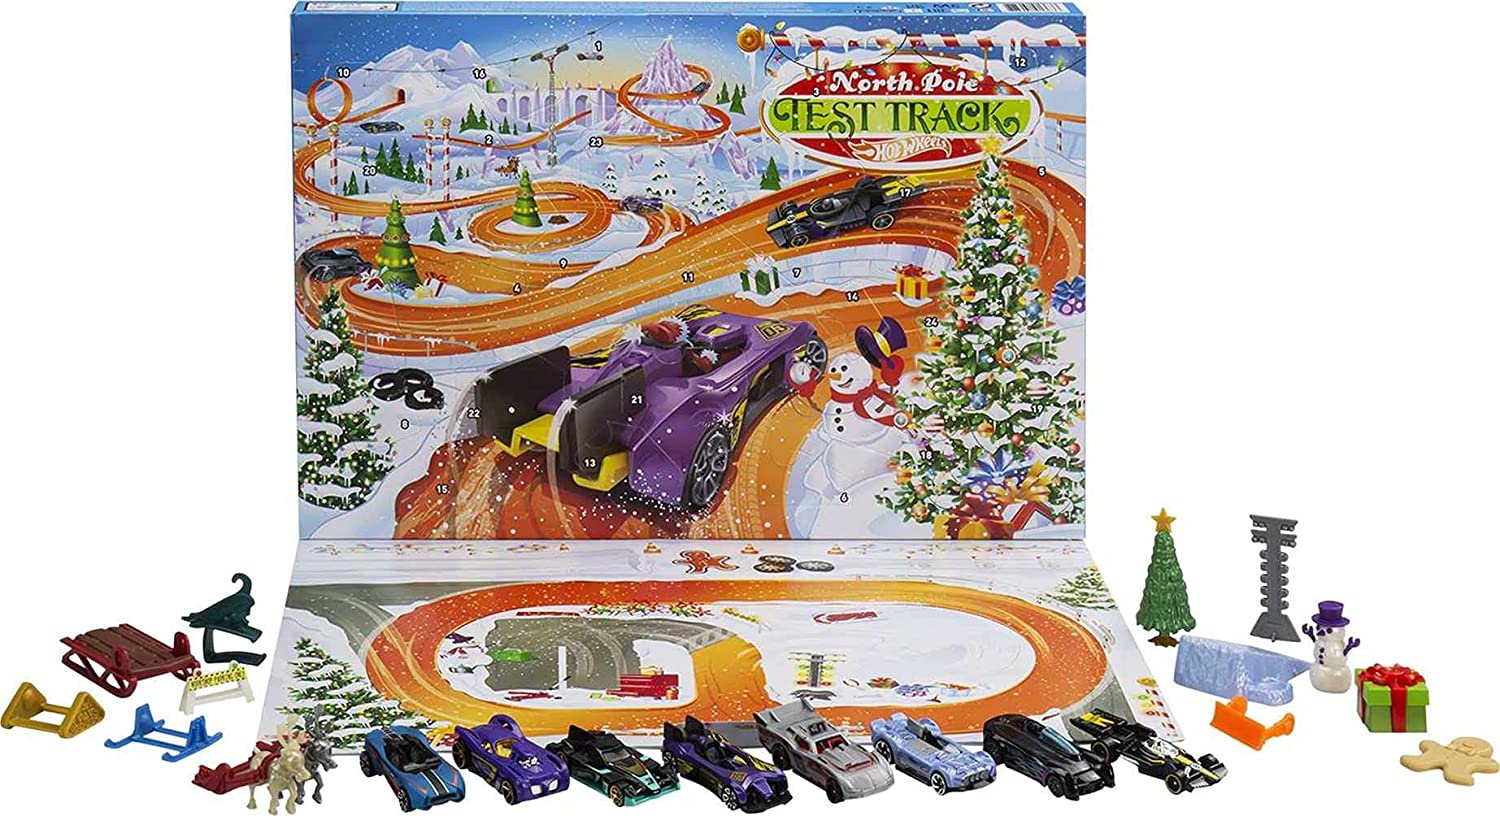 Hot Wheels 2021 Advent Calendar with 24 Surprises That Include 8 1:64 Scale Vehicles & Accessories $9.93 + Free Ship w/Prime